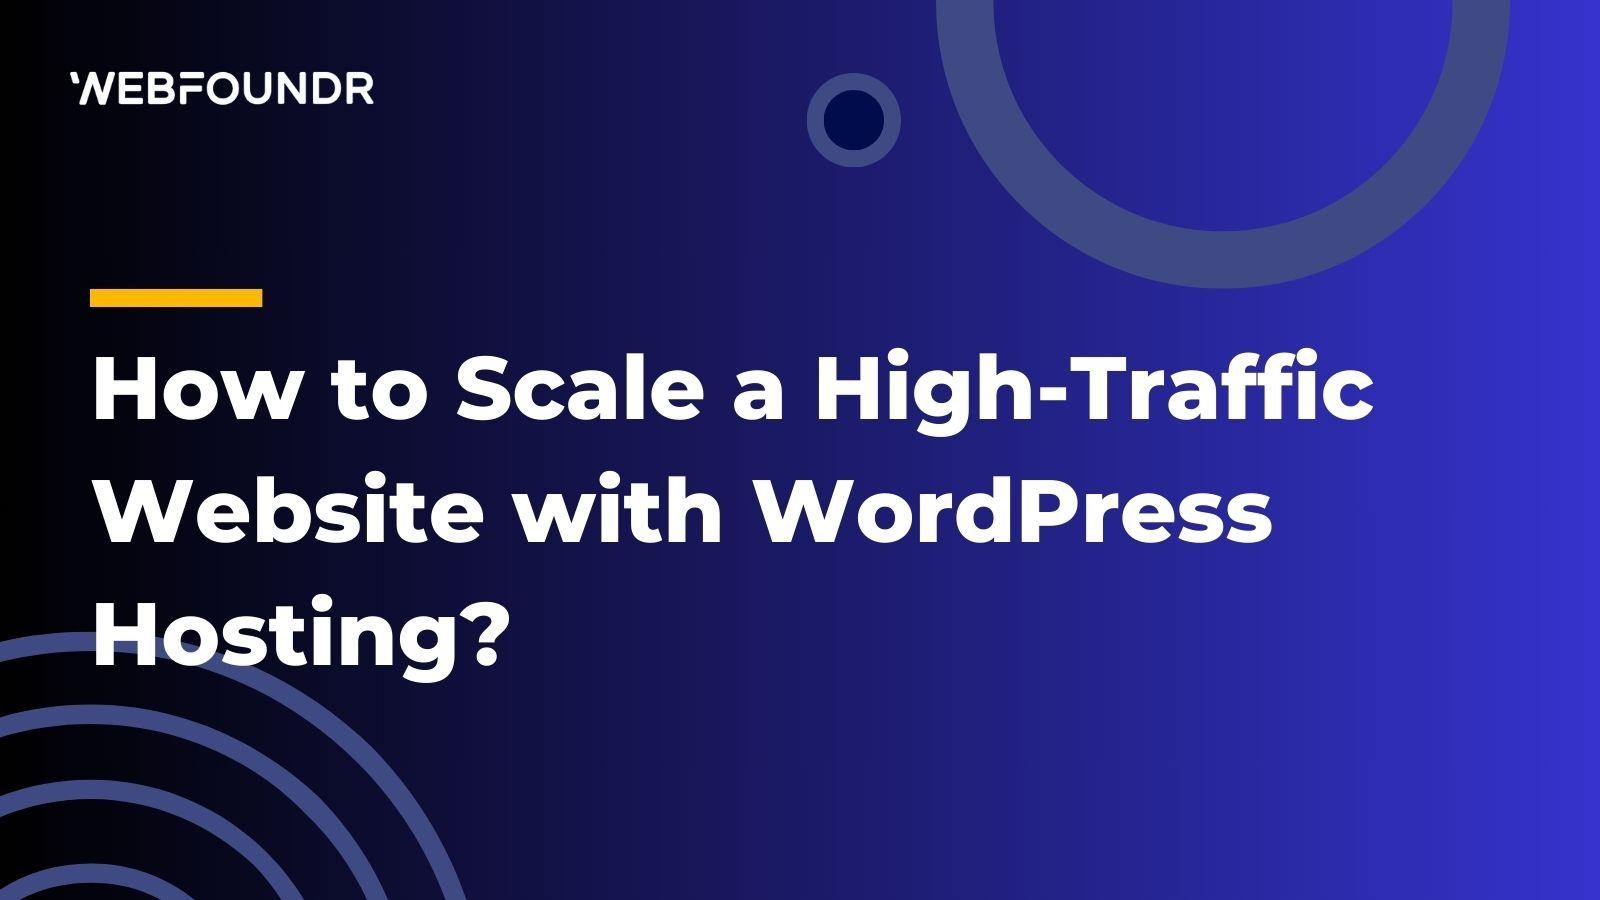 How to Scale a High-Traffic Website with WordPress Hosting